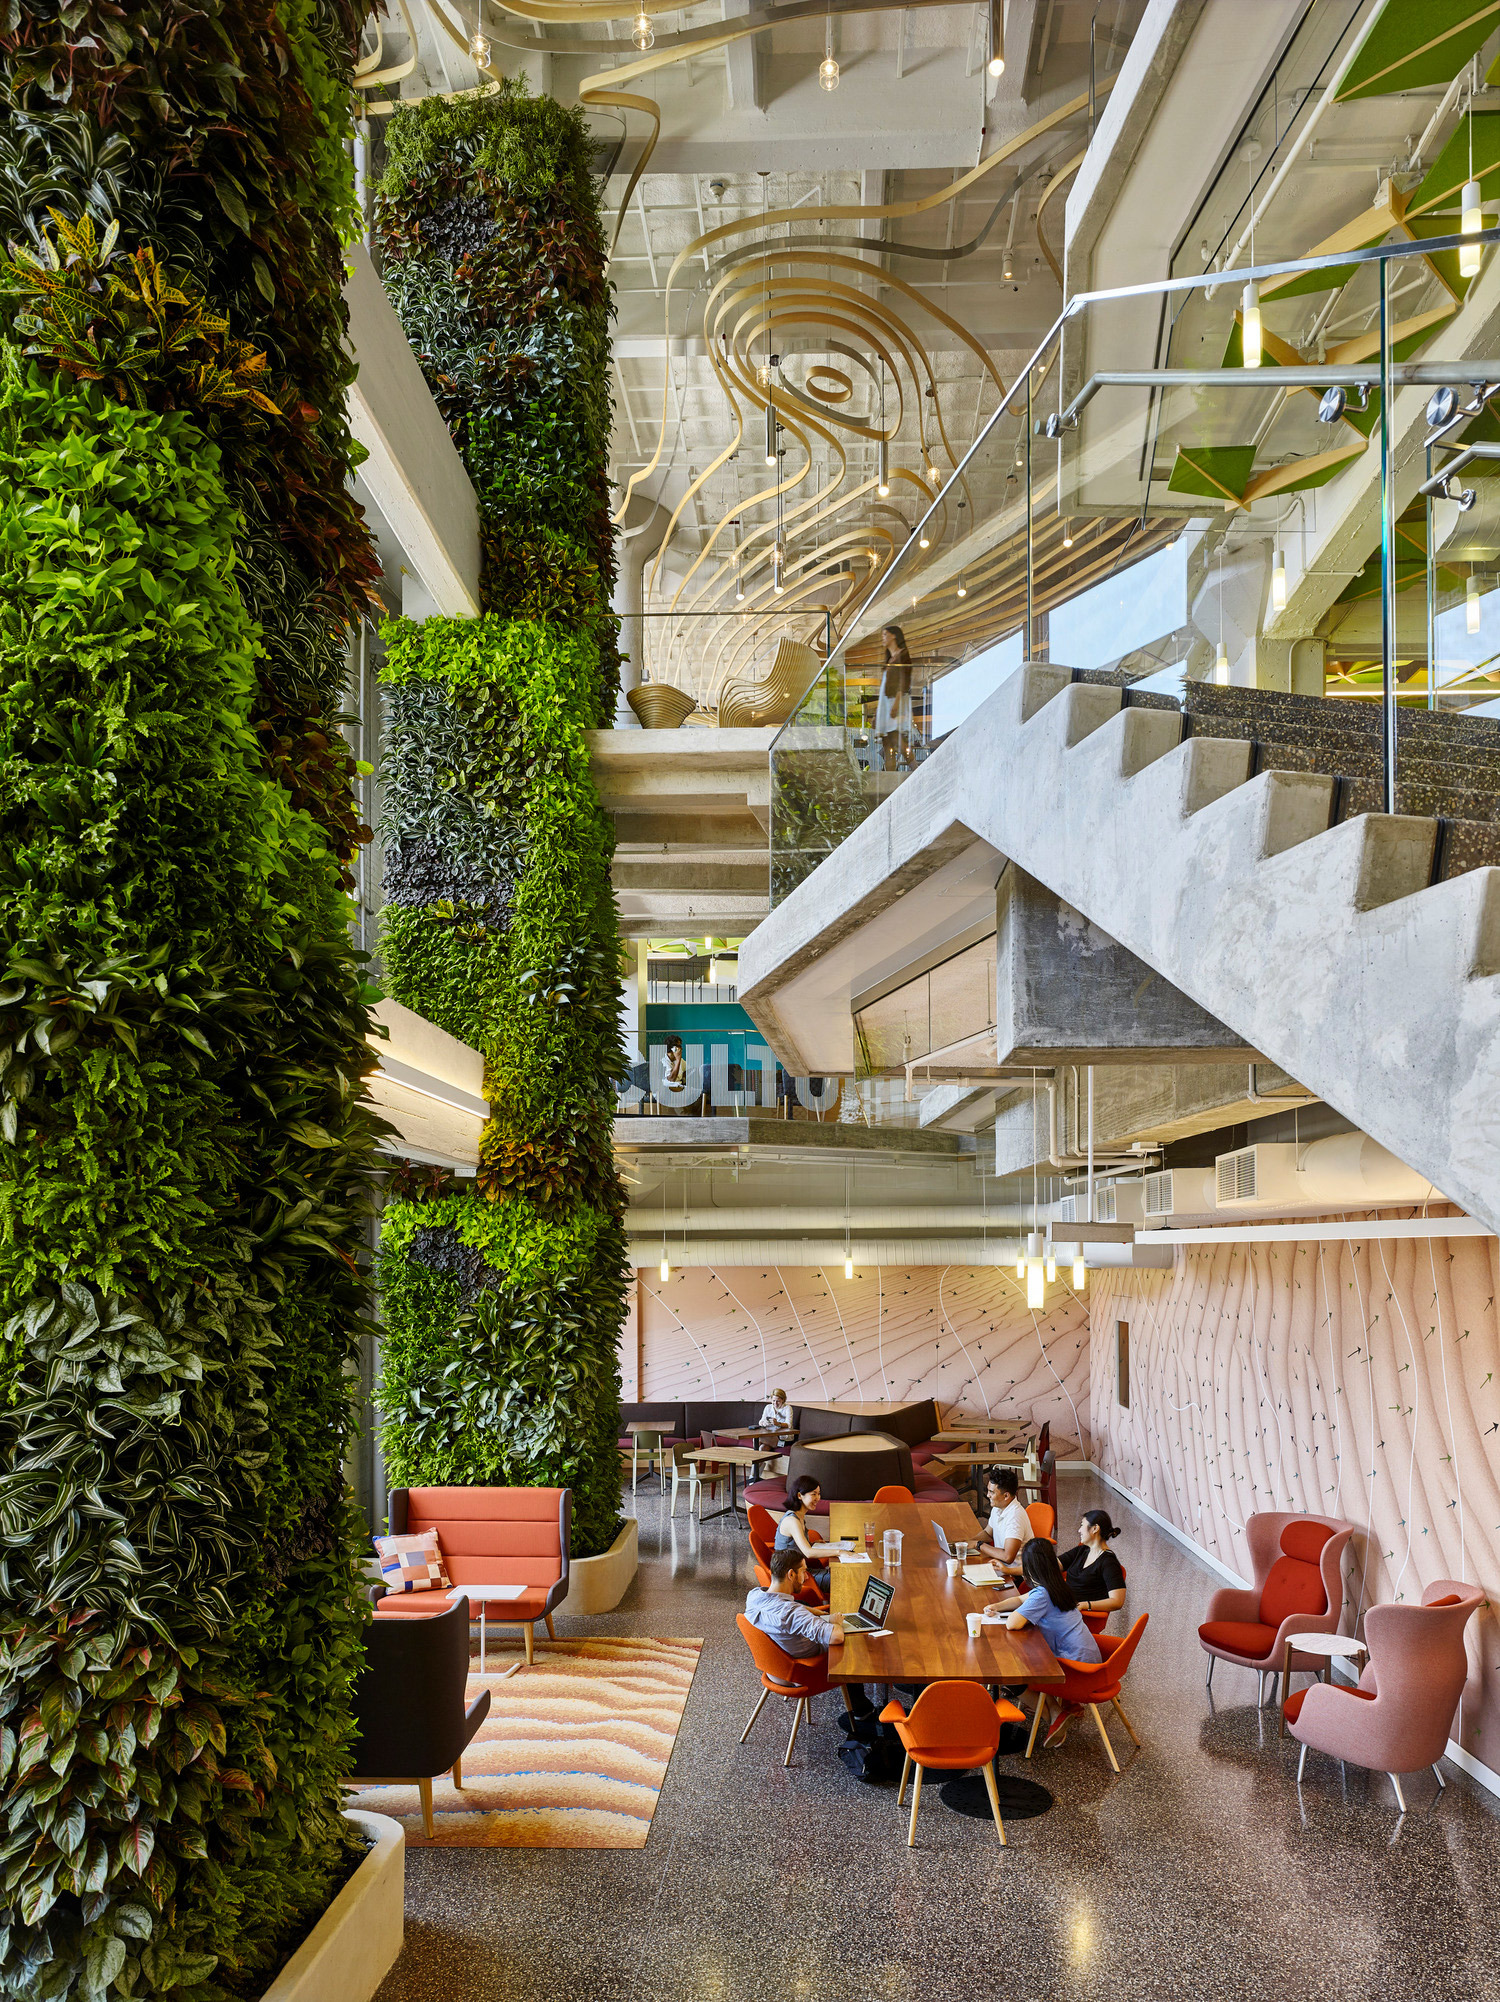 Vertical garden flanks a glass-walled interior space with a floating concrete staircase. Exposed ceiling ducts contrast with plush seating and warm wood tones, promoting a blend of industrial and organic design elements.